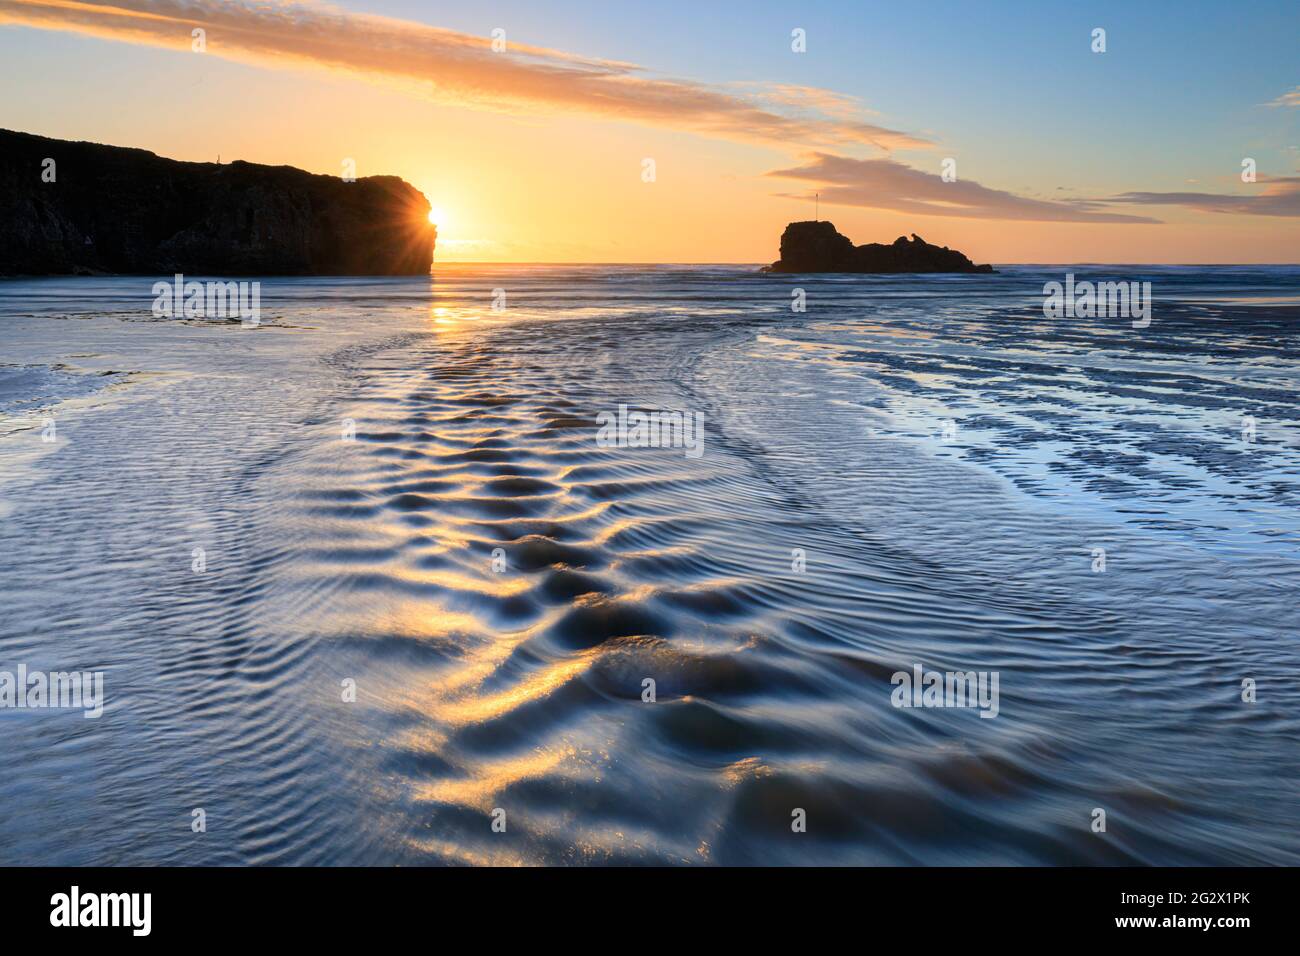 Sand ripples and a river leads the viewer's eye towards Chapel Rock on Cornwall's Perranporth Beach.  The image was captured shortly before sunset. Stock Photo